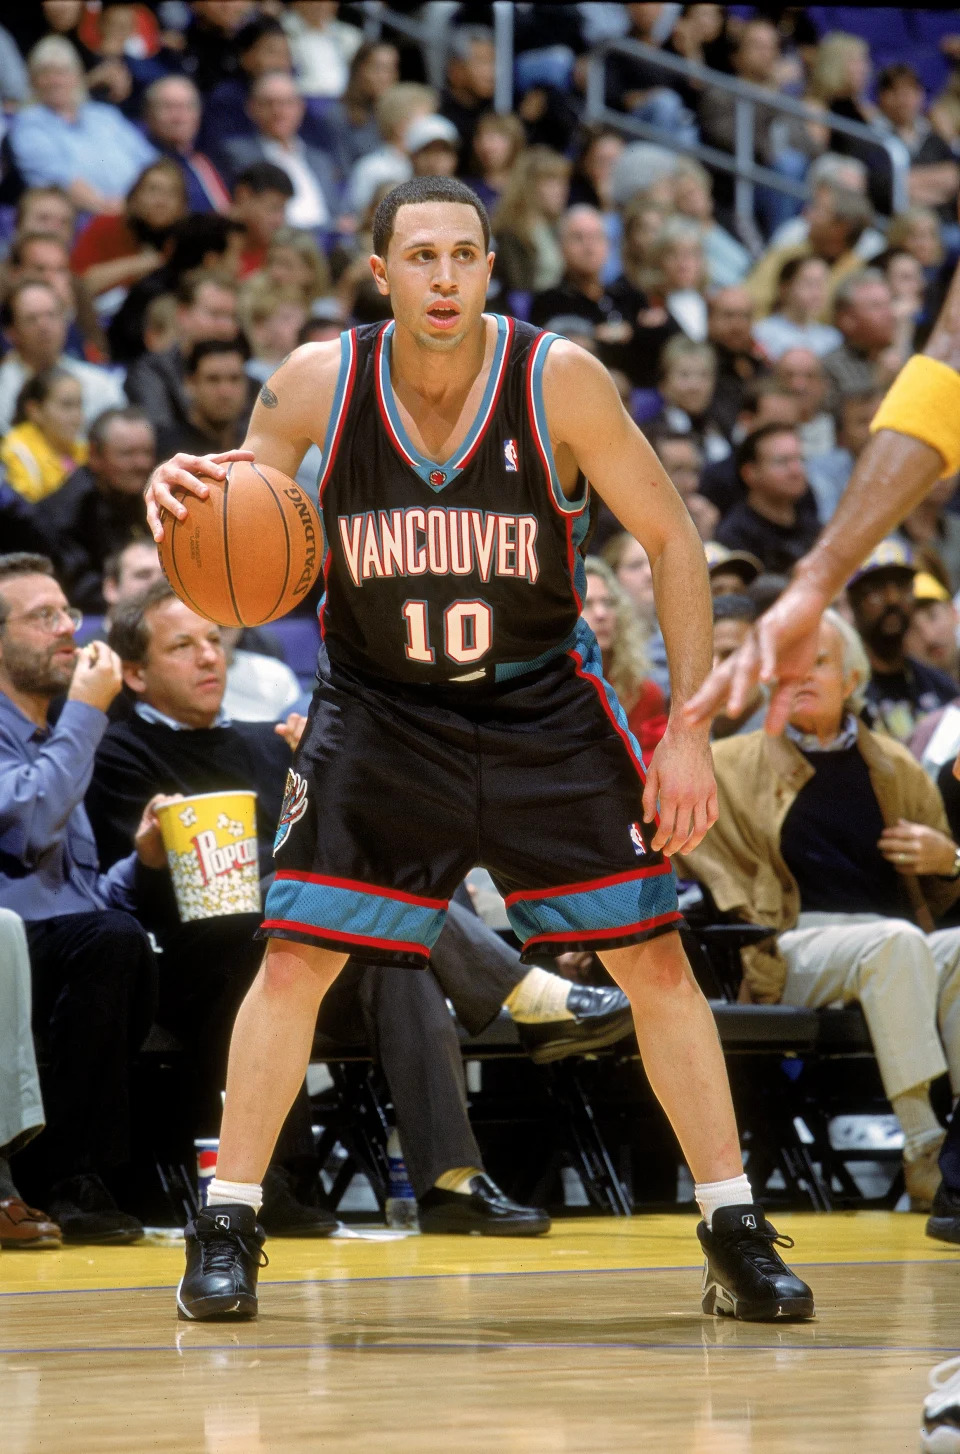 Mike Bibby with the Vancouver Grizzlies. (Getty Images)